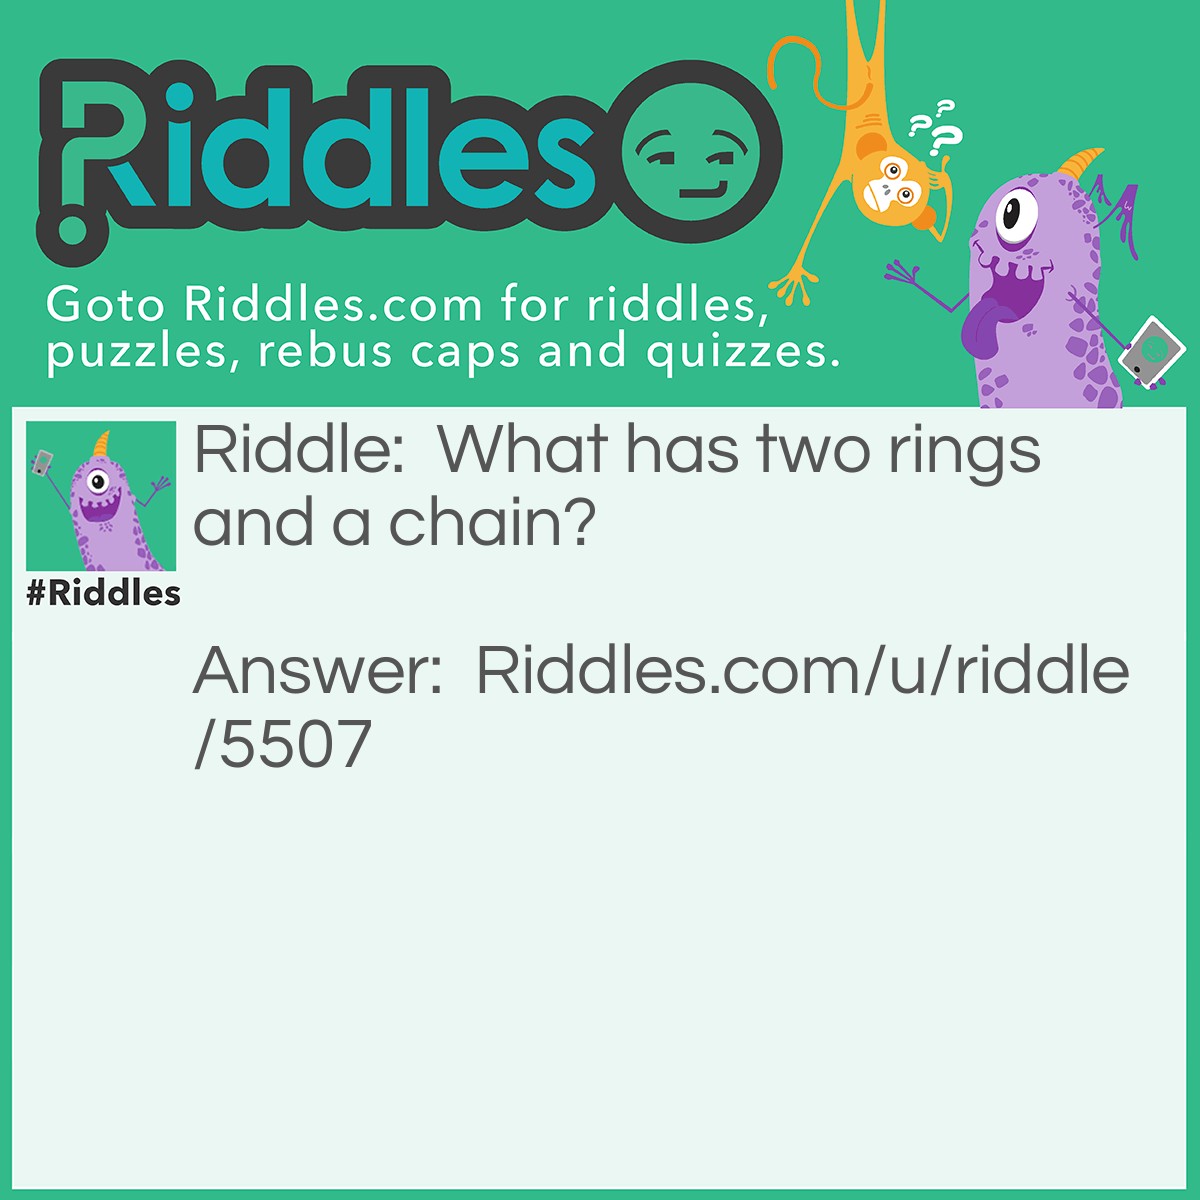 Riddle: What has two rings and a chain? Answer: Handcuffs.